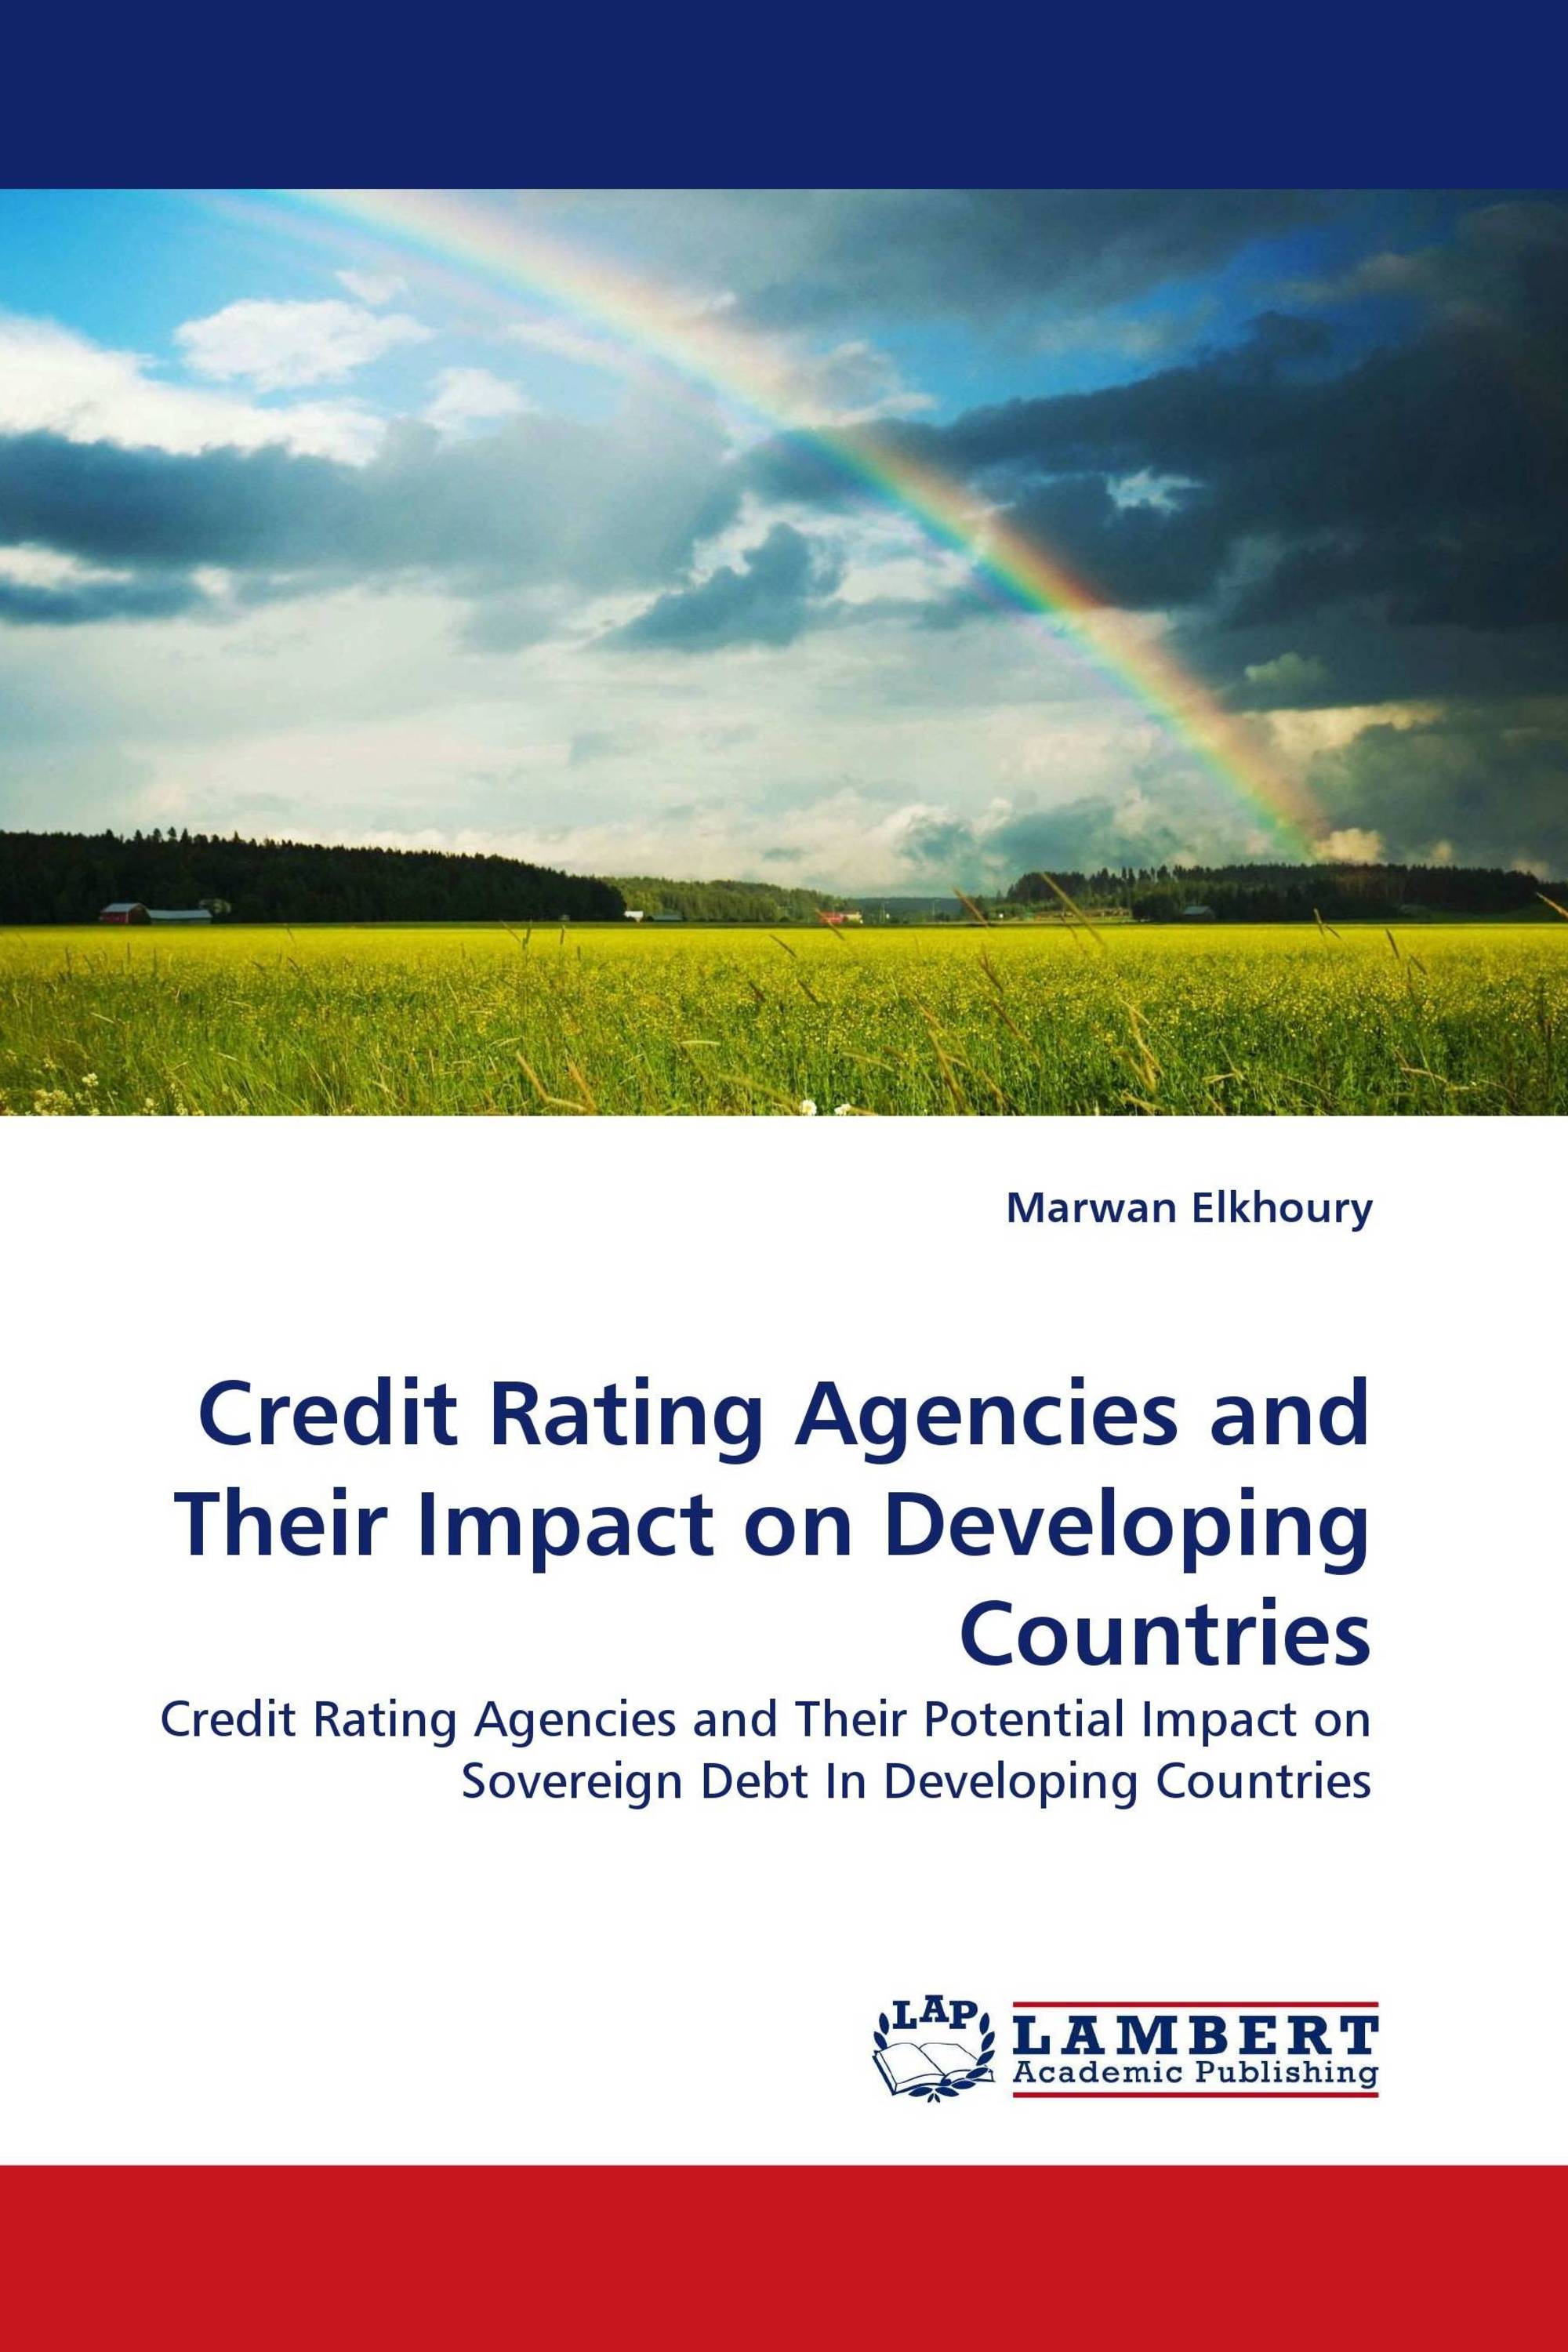 Credit Rating Agencies and Their Impact on Developing Countries